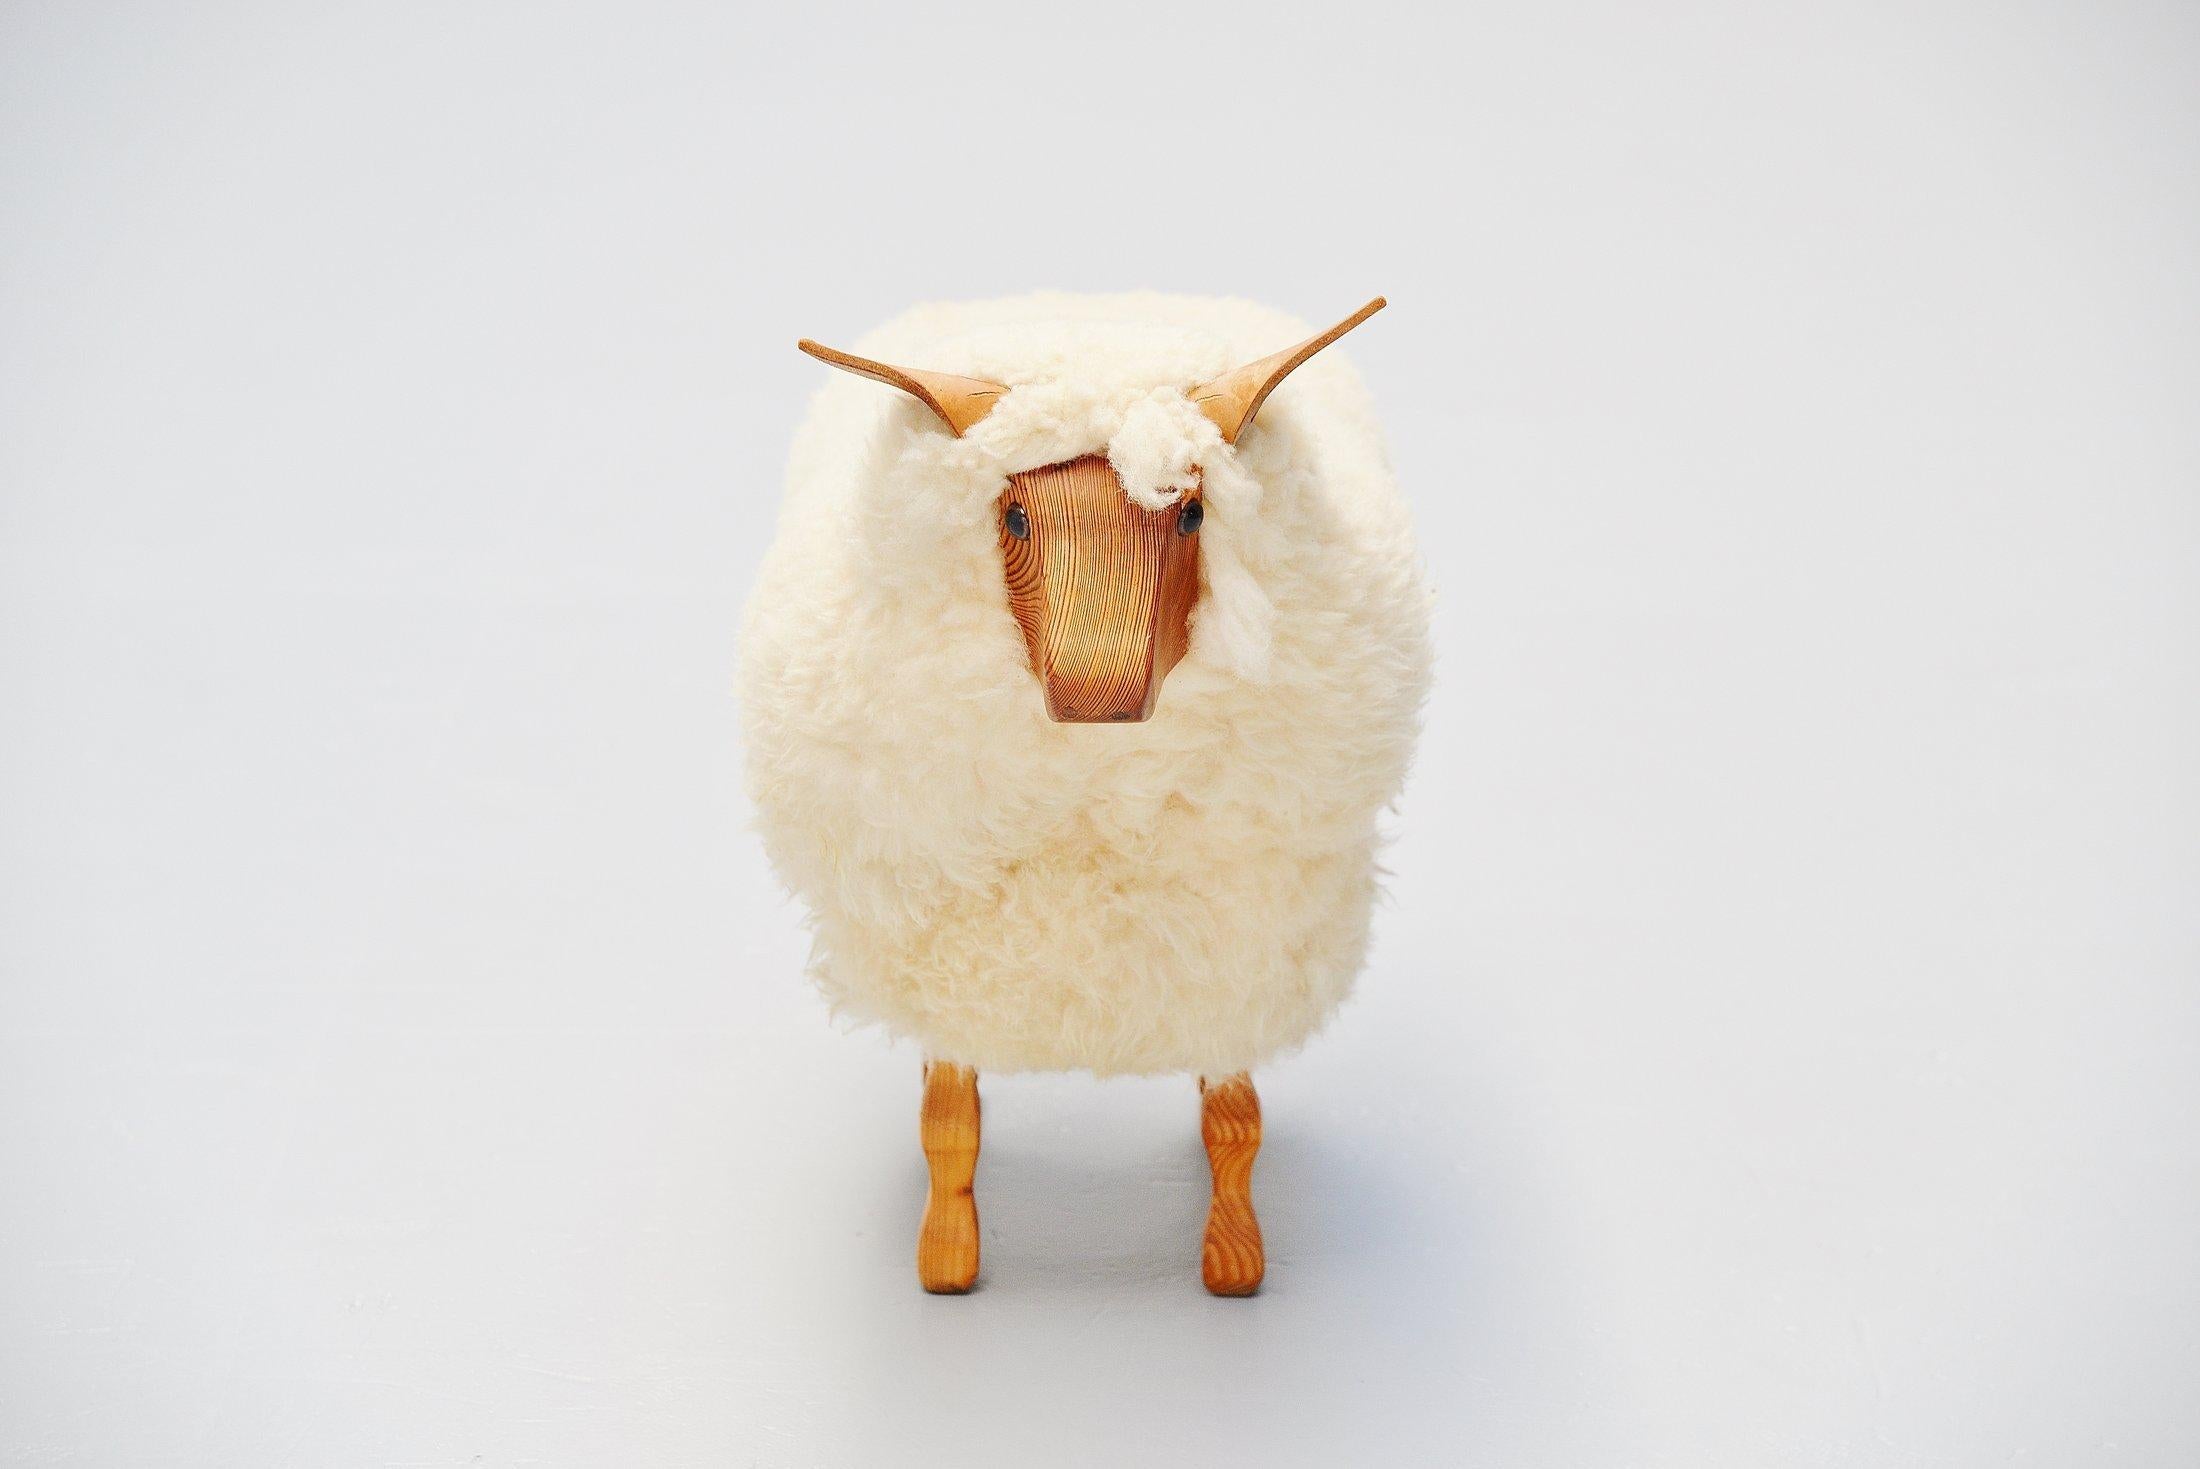 Very nice decorative sheep made by unknown manufacturer Holland, 1970. This sheep was made of solid pine wood and is covered with real sheep wool, its ears are made of leather. These sheep were designed as shop window decoration for blankets made of